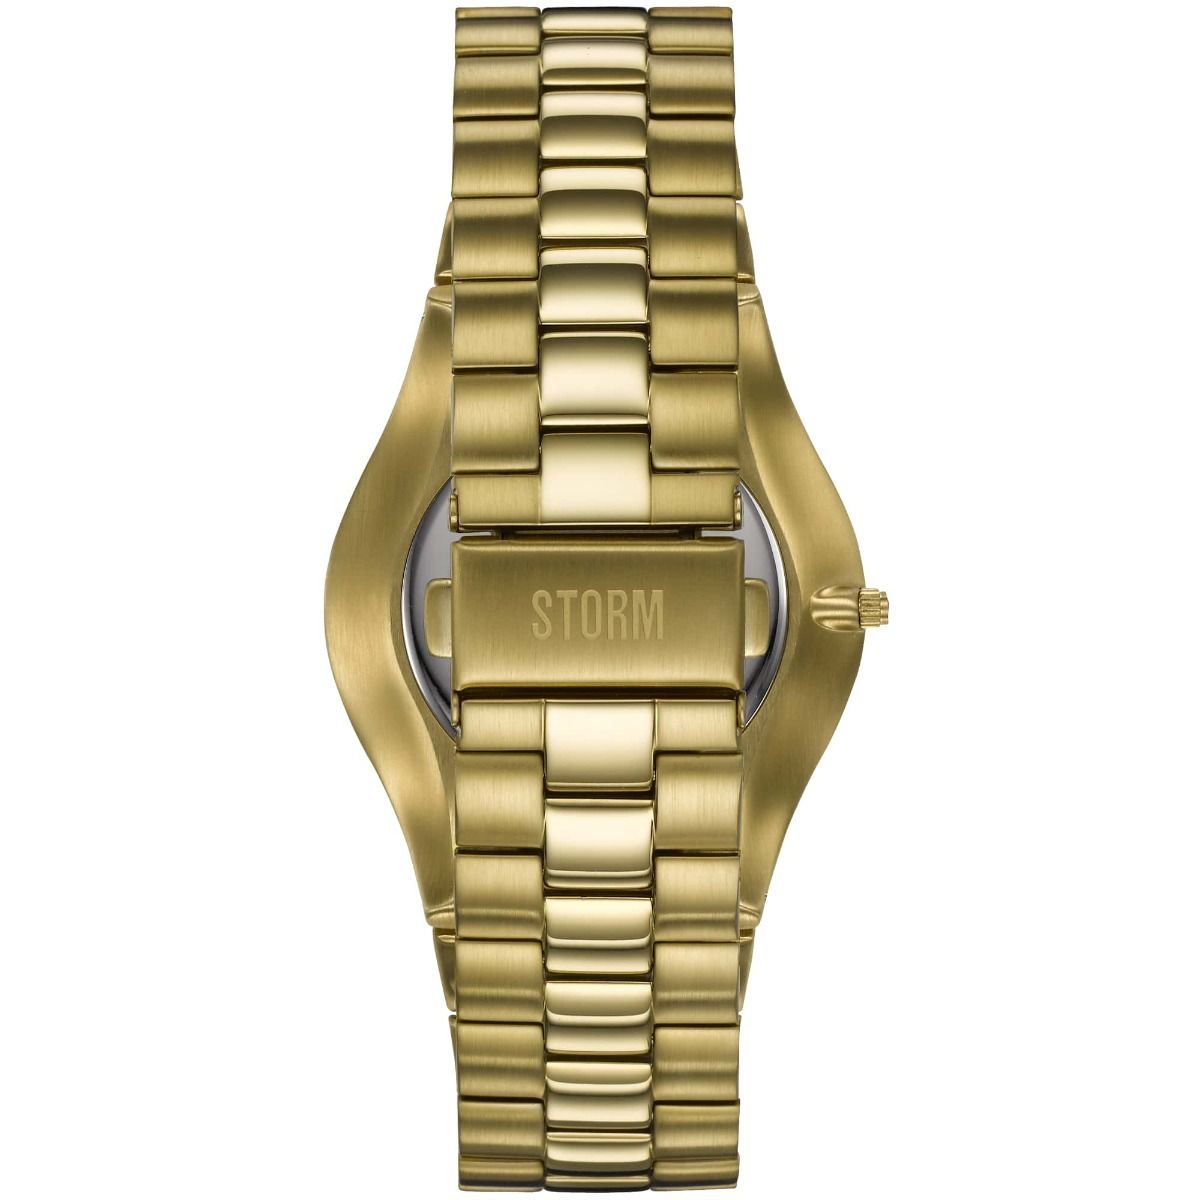 STORM Slim-X XL Men's Watch in Gold and Blue Watches Storm London 